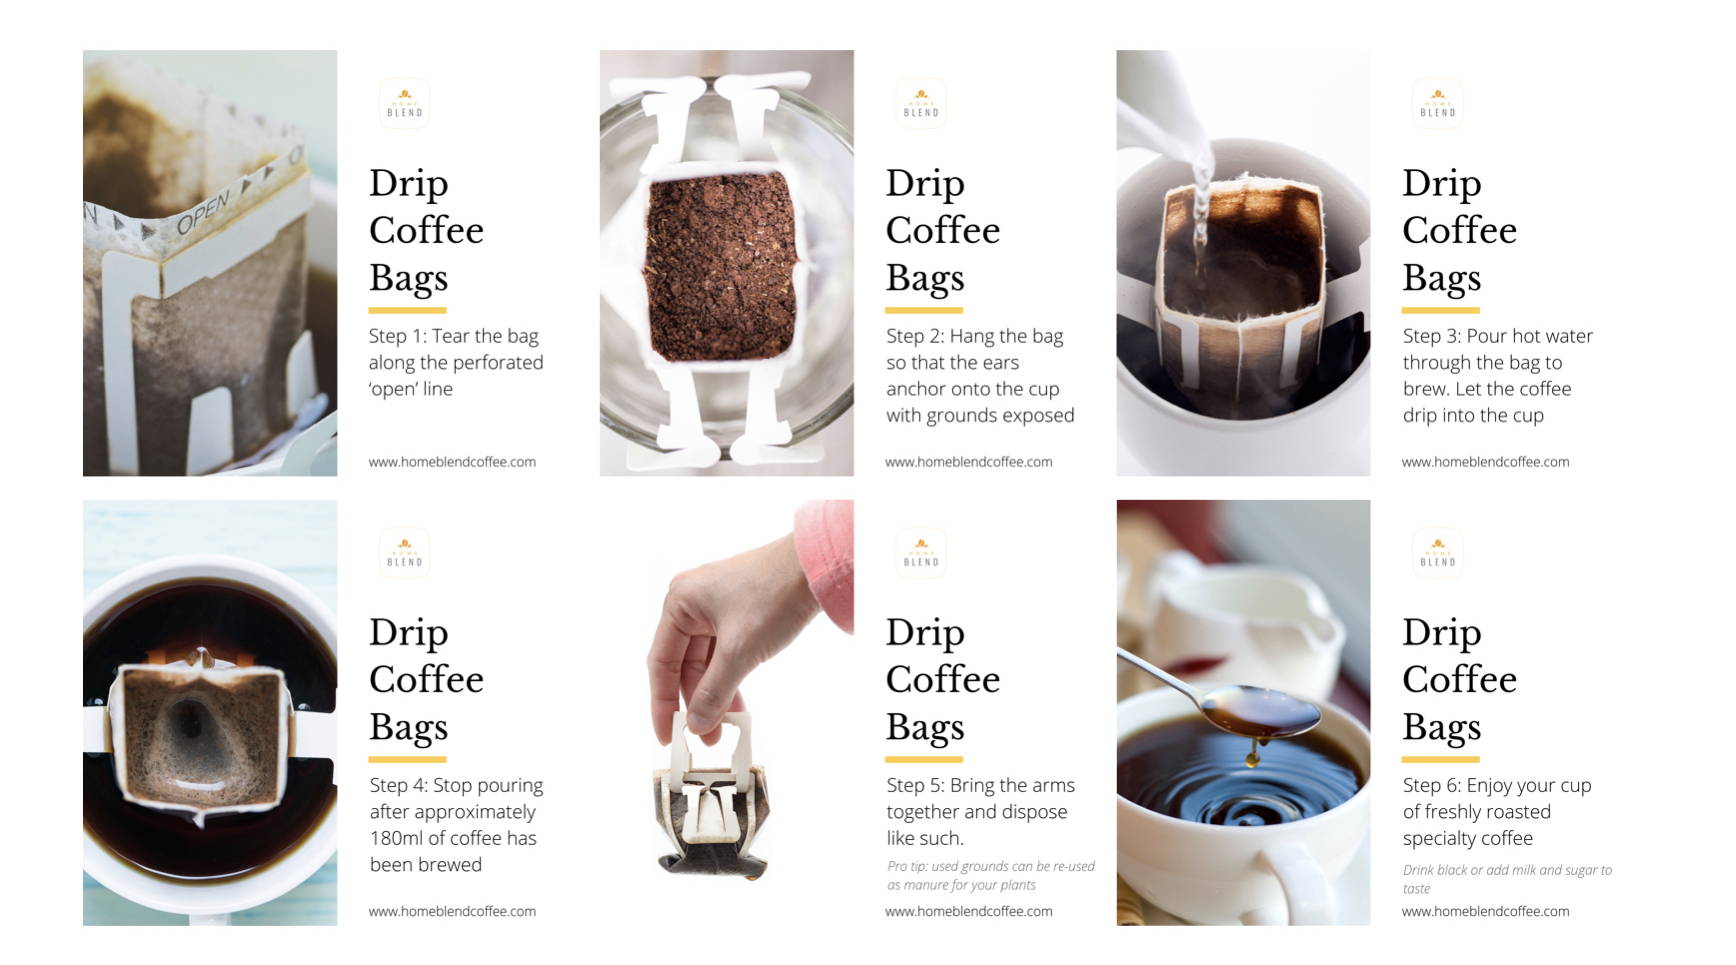 Home Blend Drip Coffee Bags - The Difference Between Instant Coffee And Whole Bean Coffee